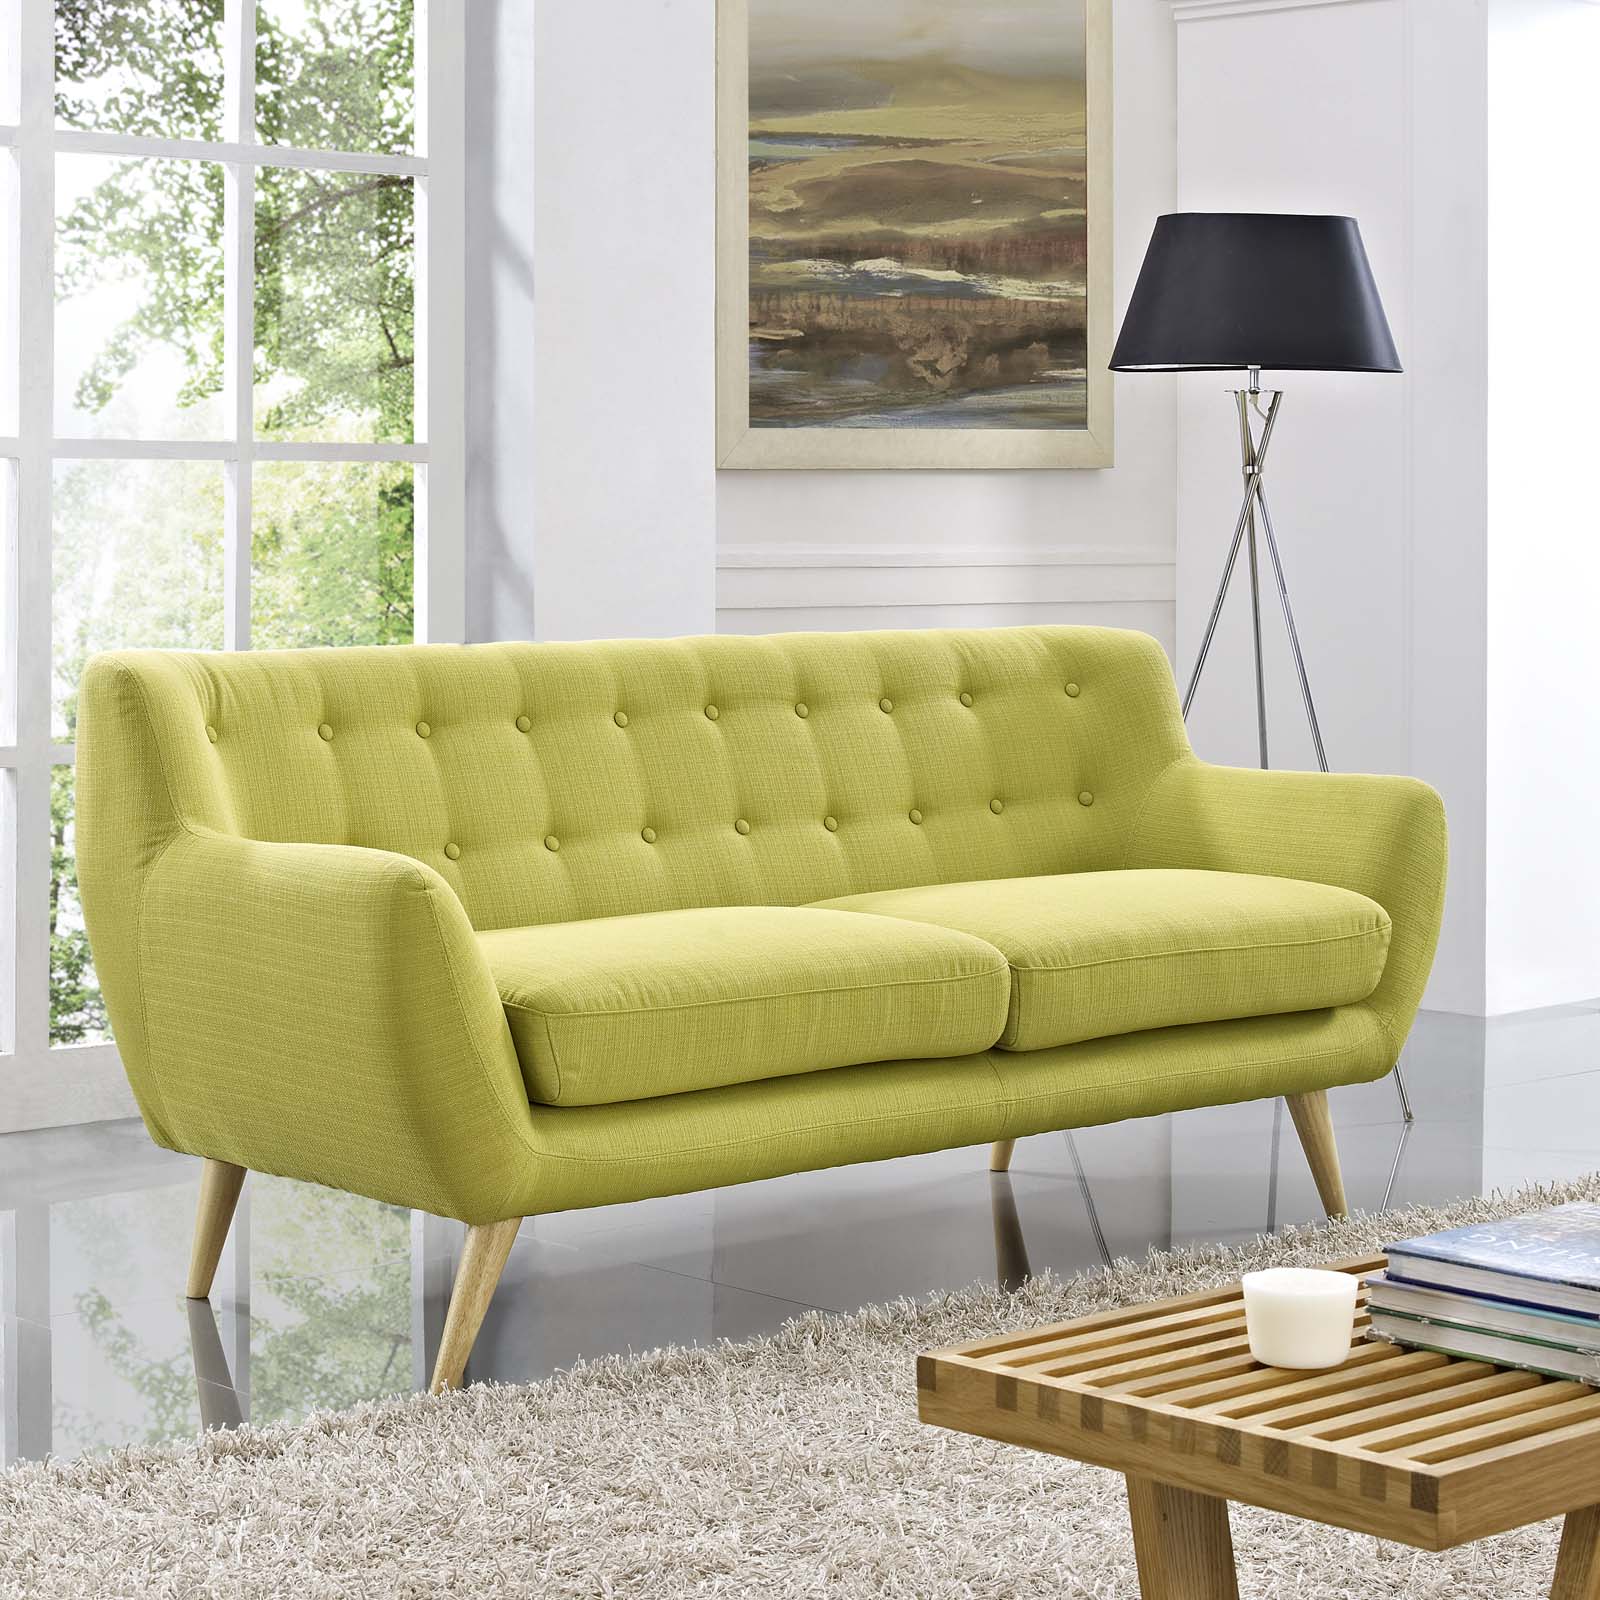 Modway Sofas & Couches - Remark Upholstered Fabric Sofa Wheatgrass